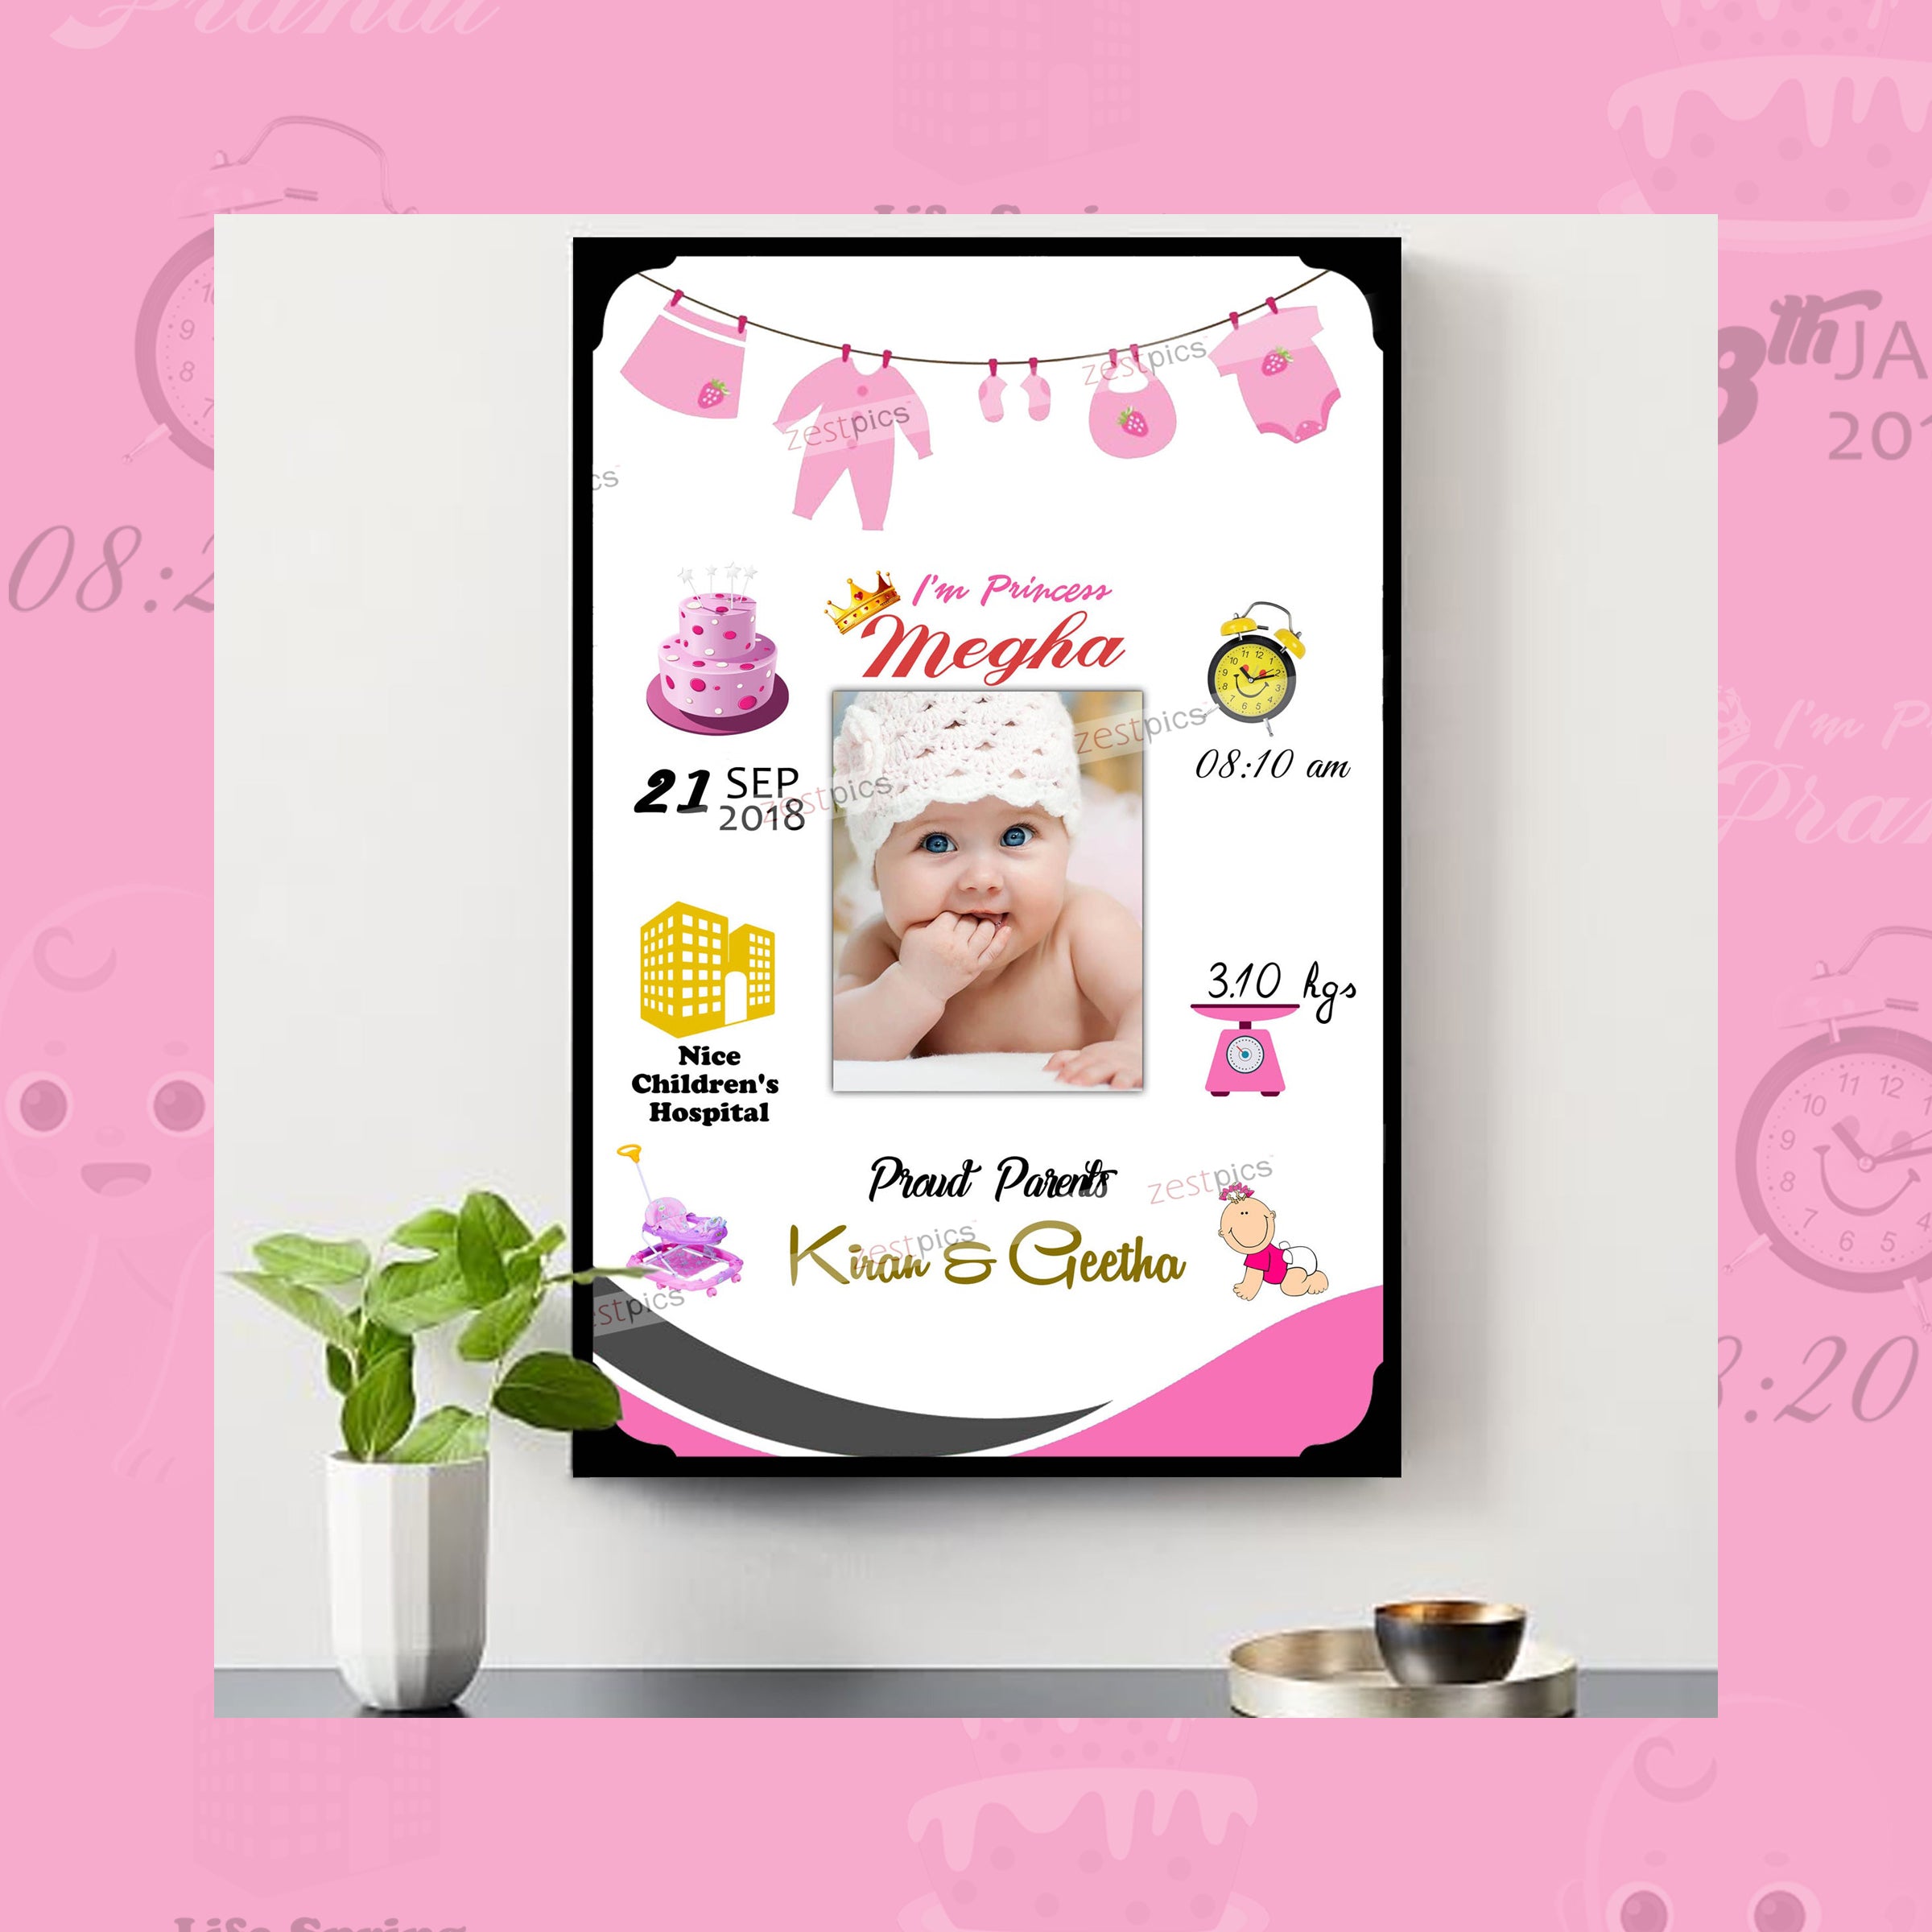 Customized Baby Frame Online in India | Zupppy – Customized Baby Frame  Online in India | Zupppy – Zupppy